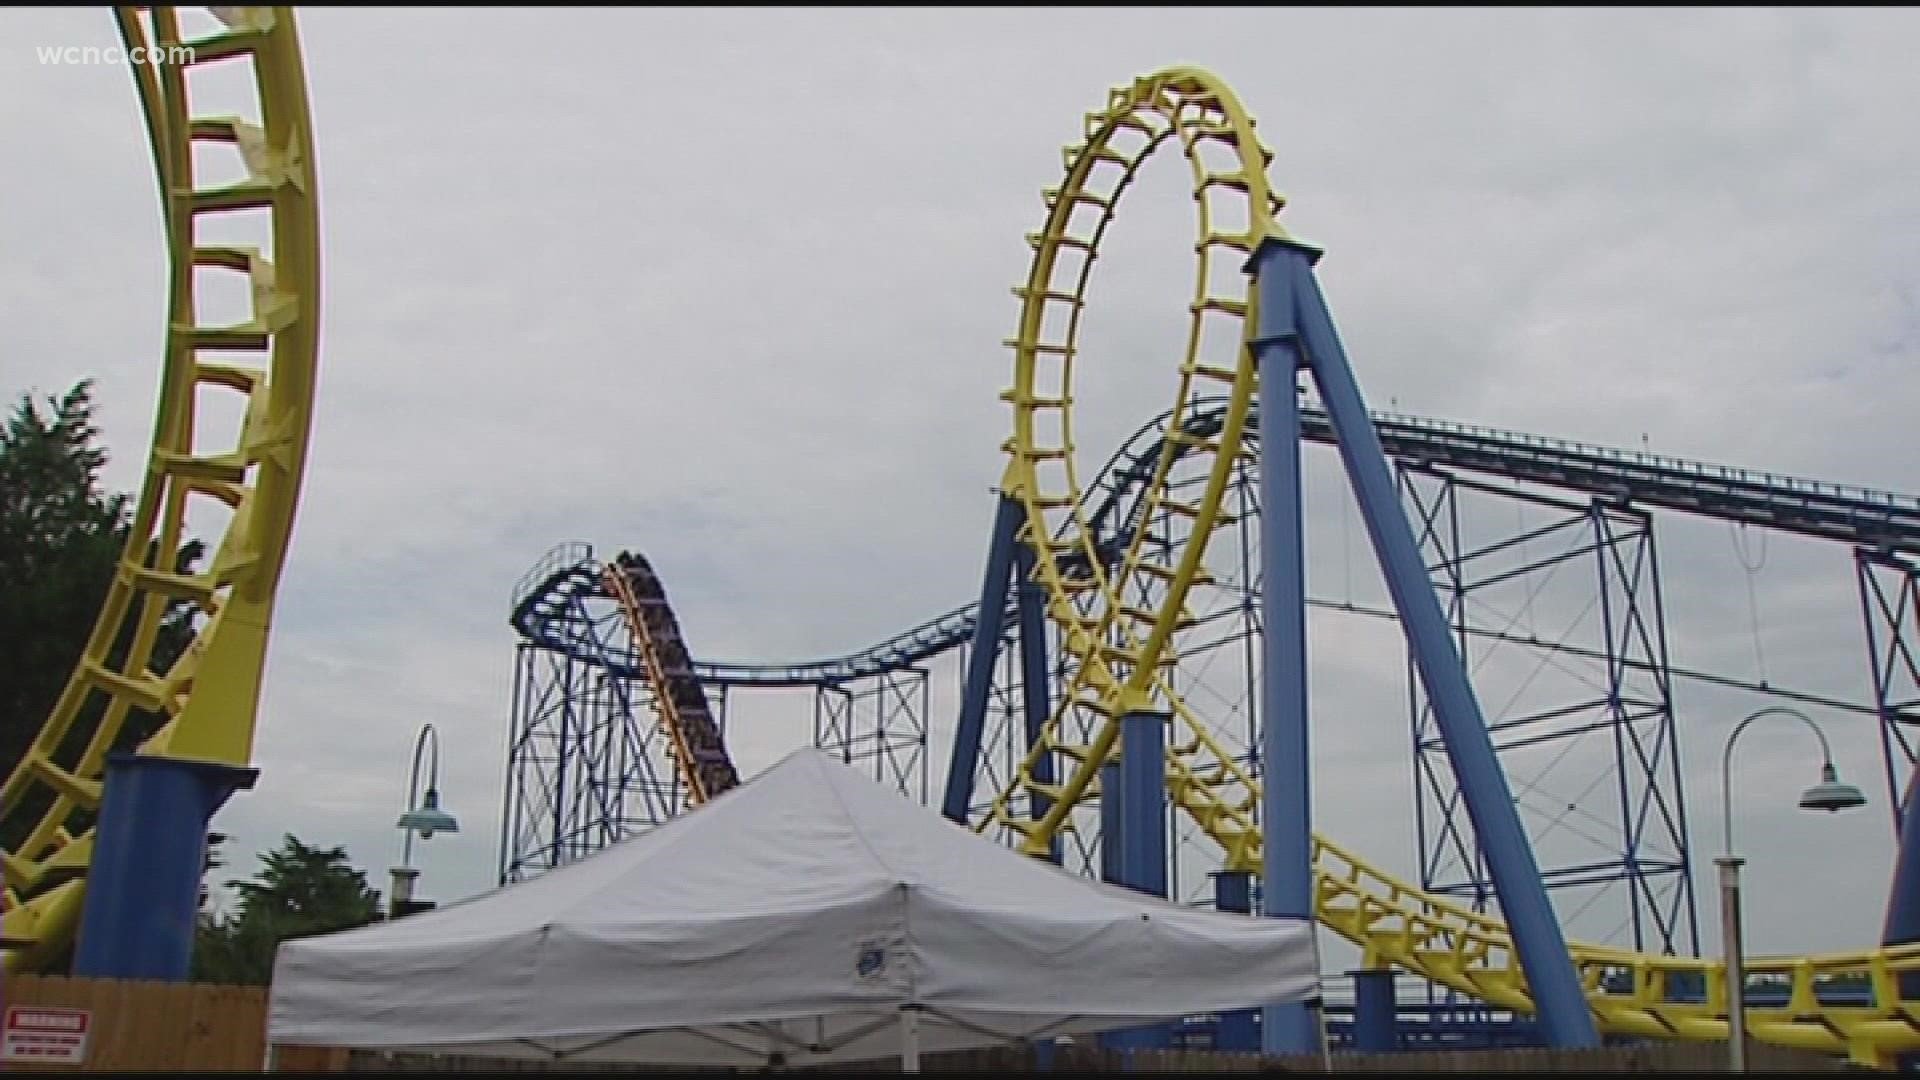 Carowinds held a job fair on Monday ahead of its March 12 opening. The park is hoping to hire 900 more employees before the opening and even more before this summer.